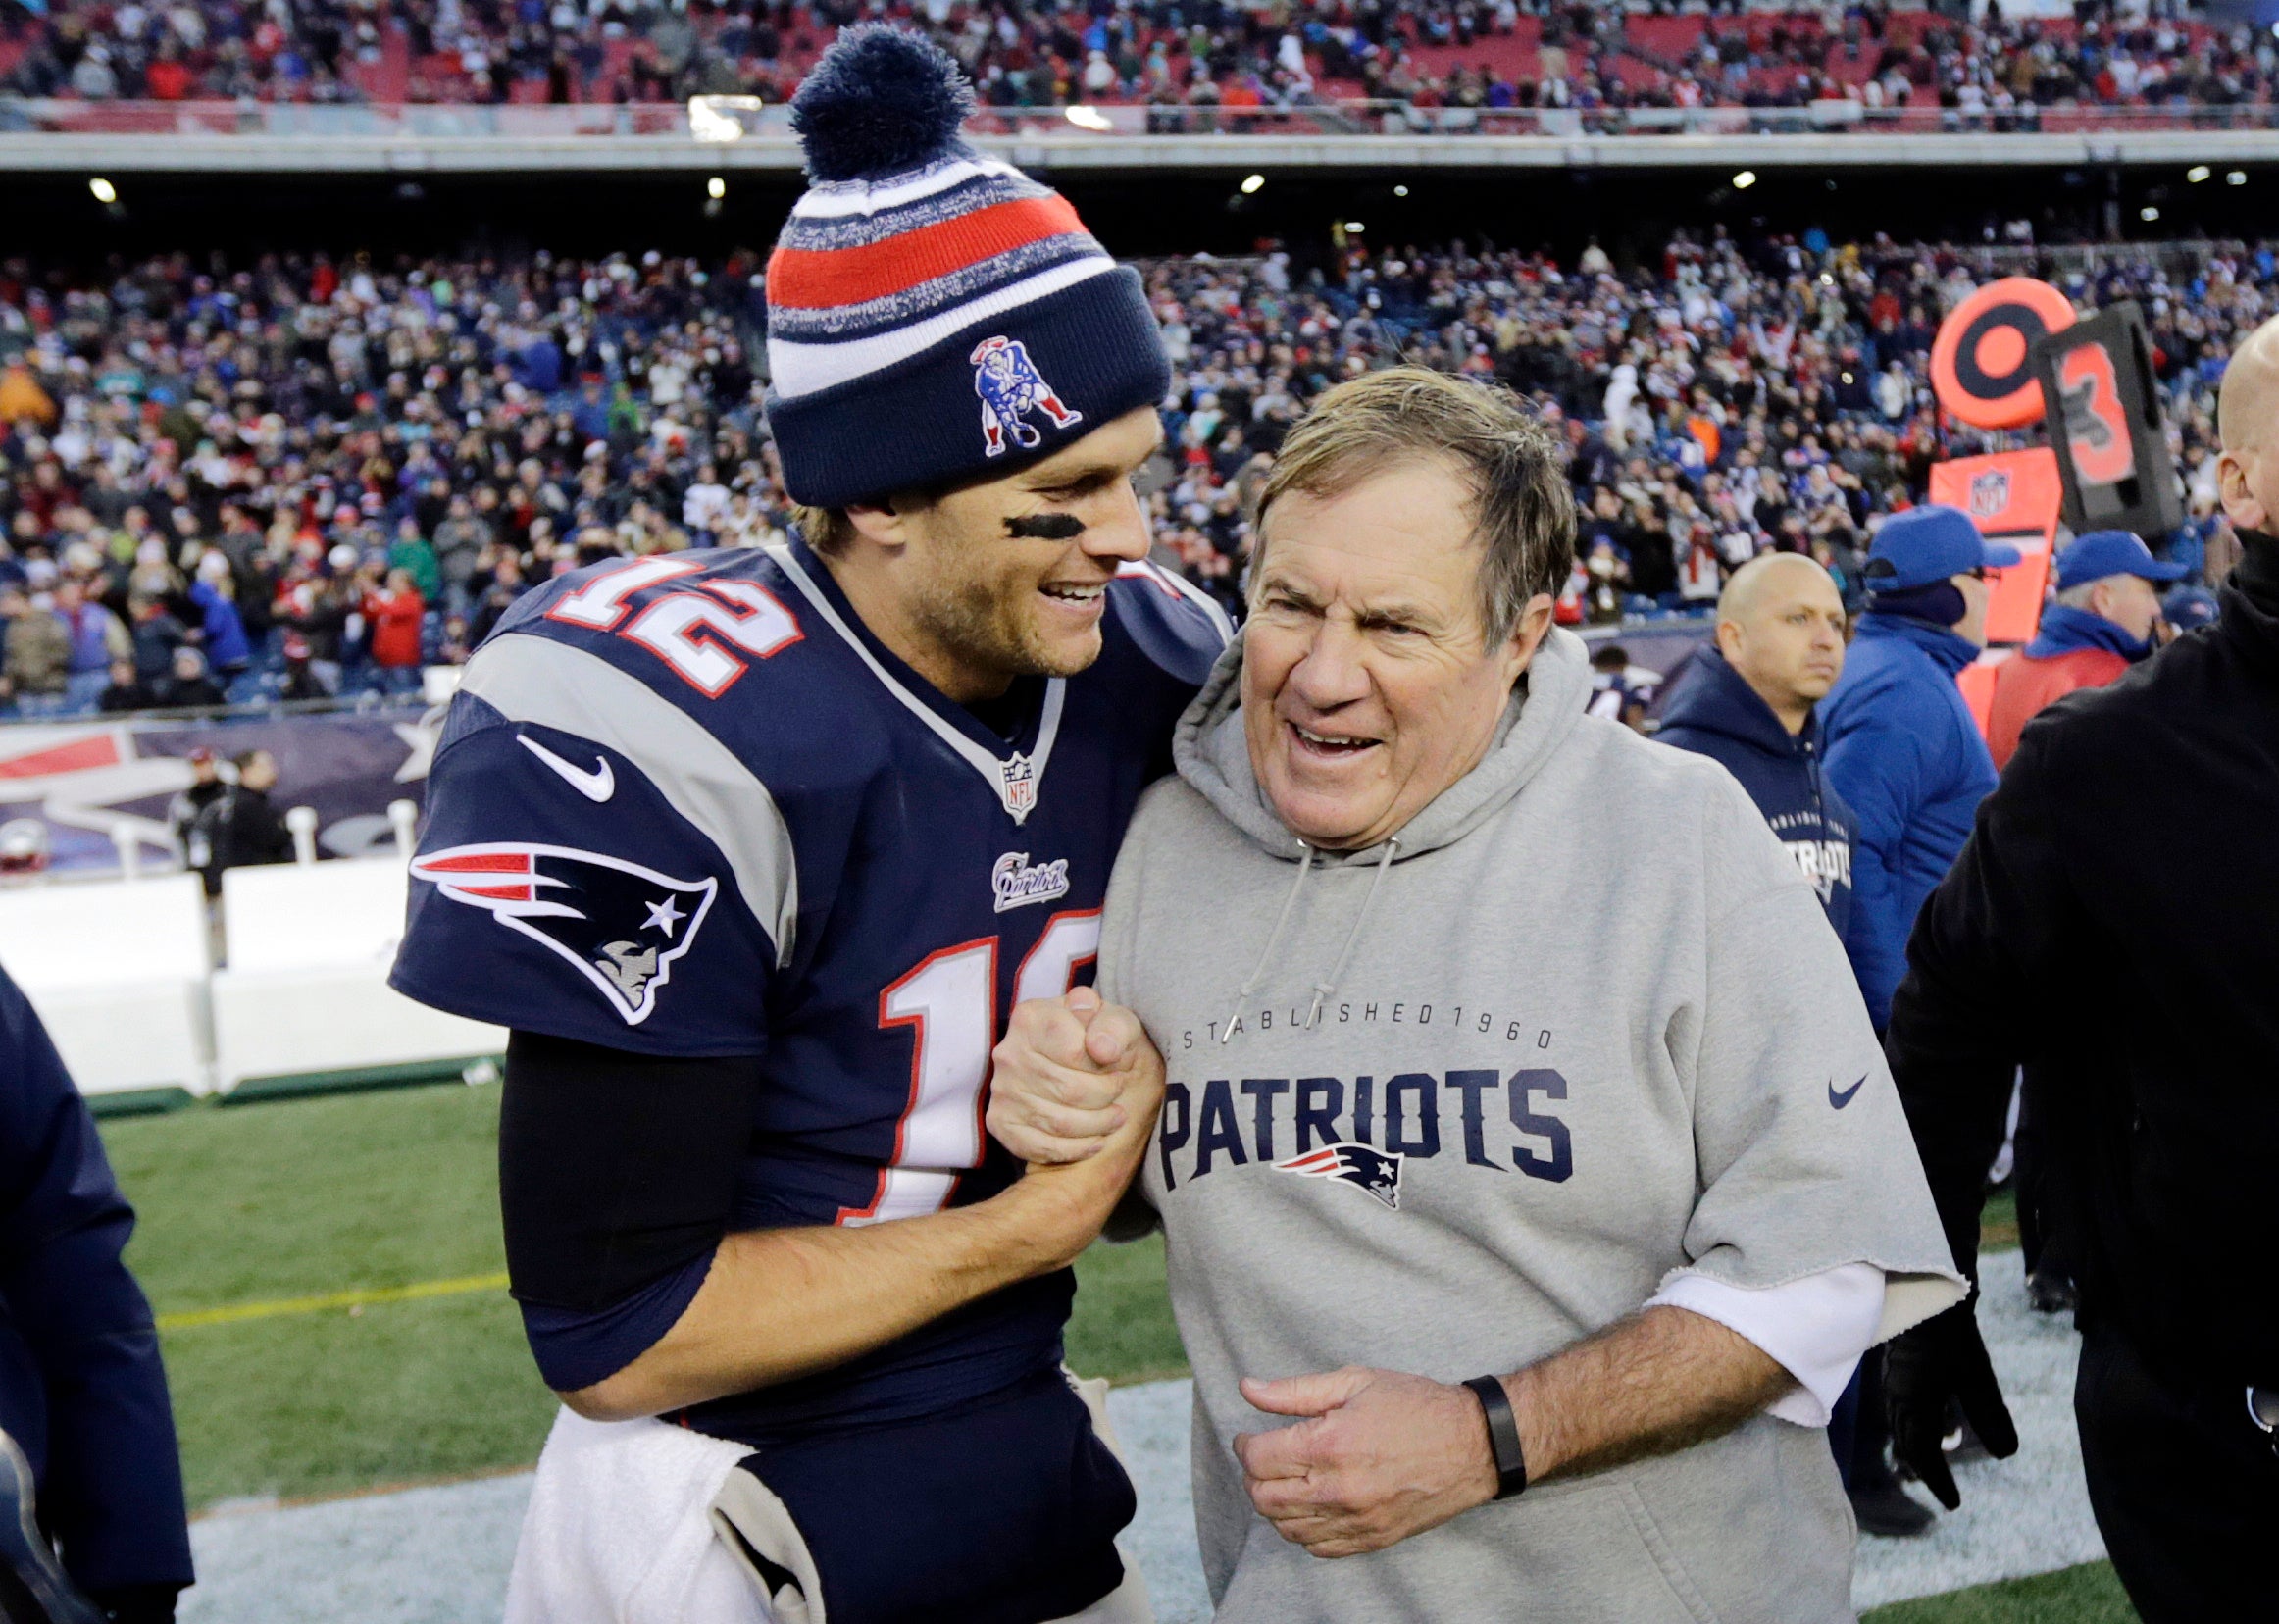 In this Dec. 14, 2014, file photo, New England Patriots quarterback Tom Brady, left, celebrates with head coach Bill Belichick after defeating the Miami Dolphins 41-13 in an NFL football game in Foxborough, Mass.